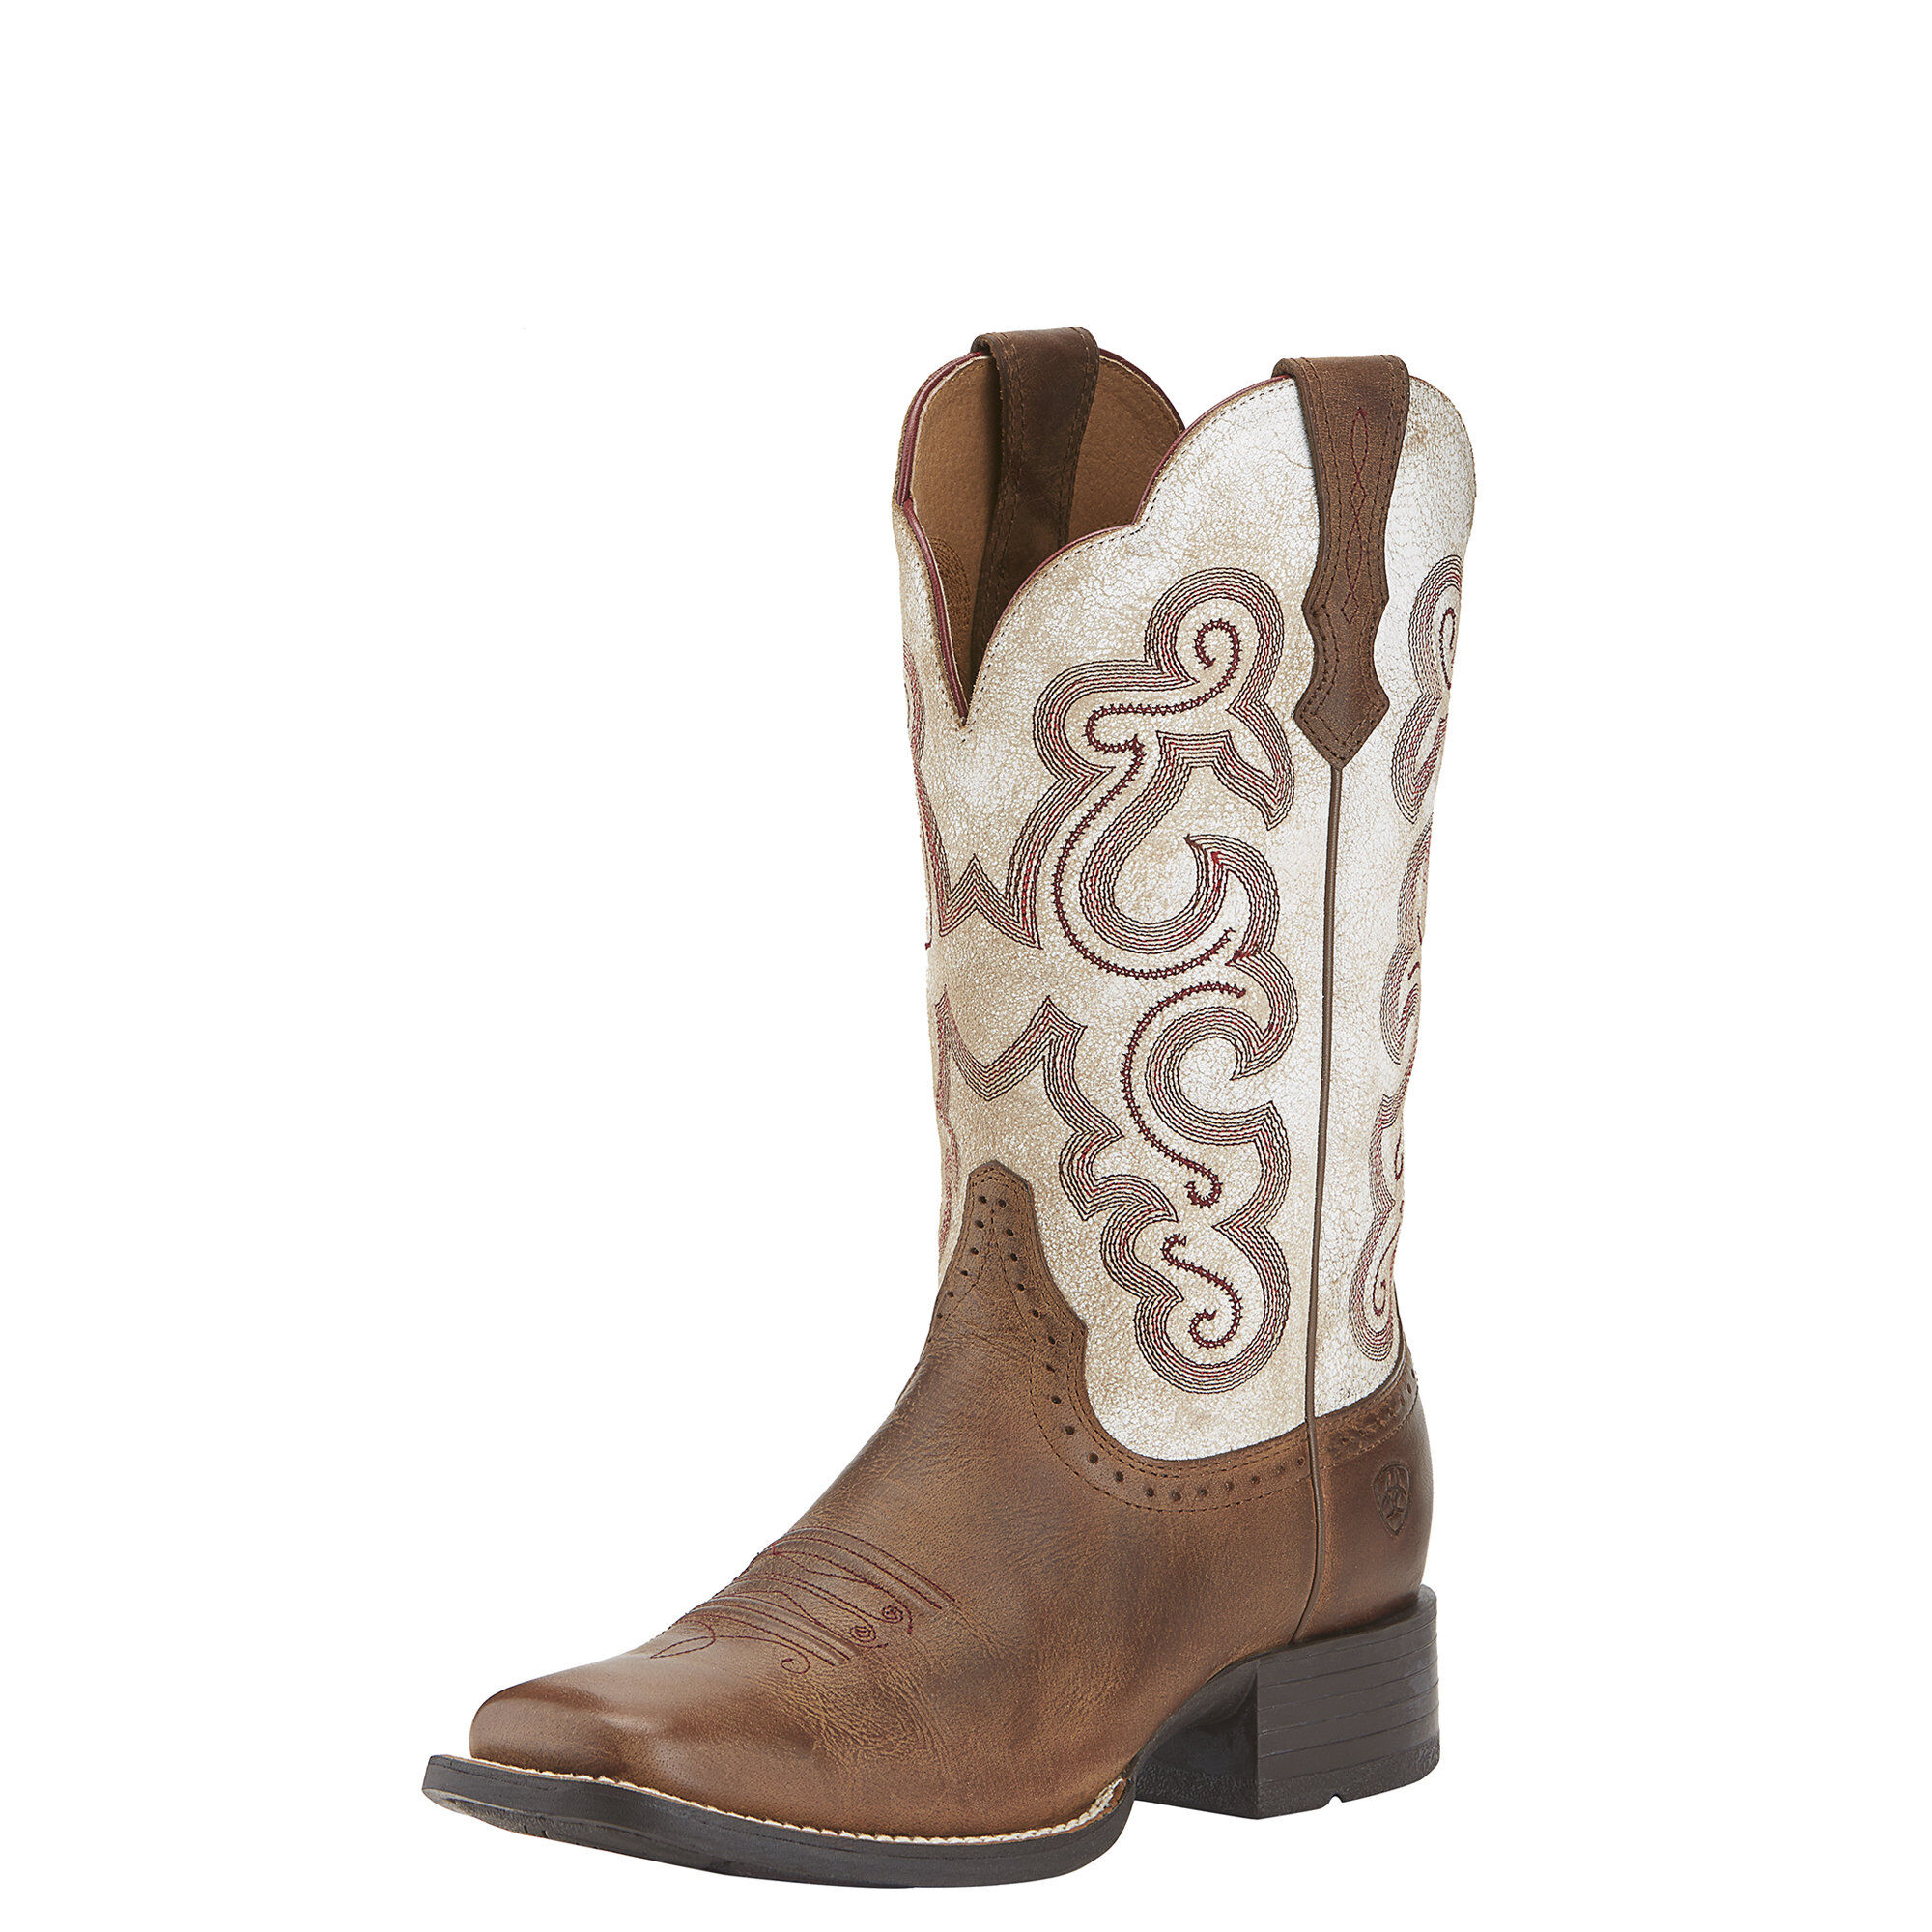 The Best Women's Cowboy Boots You Can Buy For Under $200